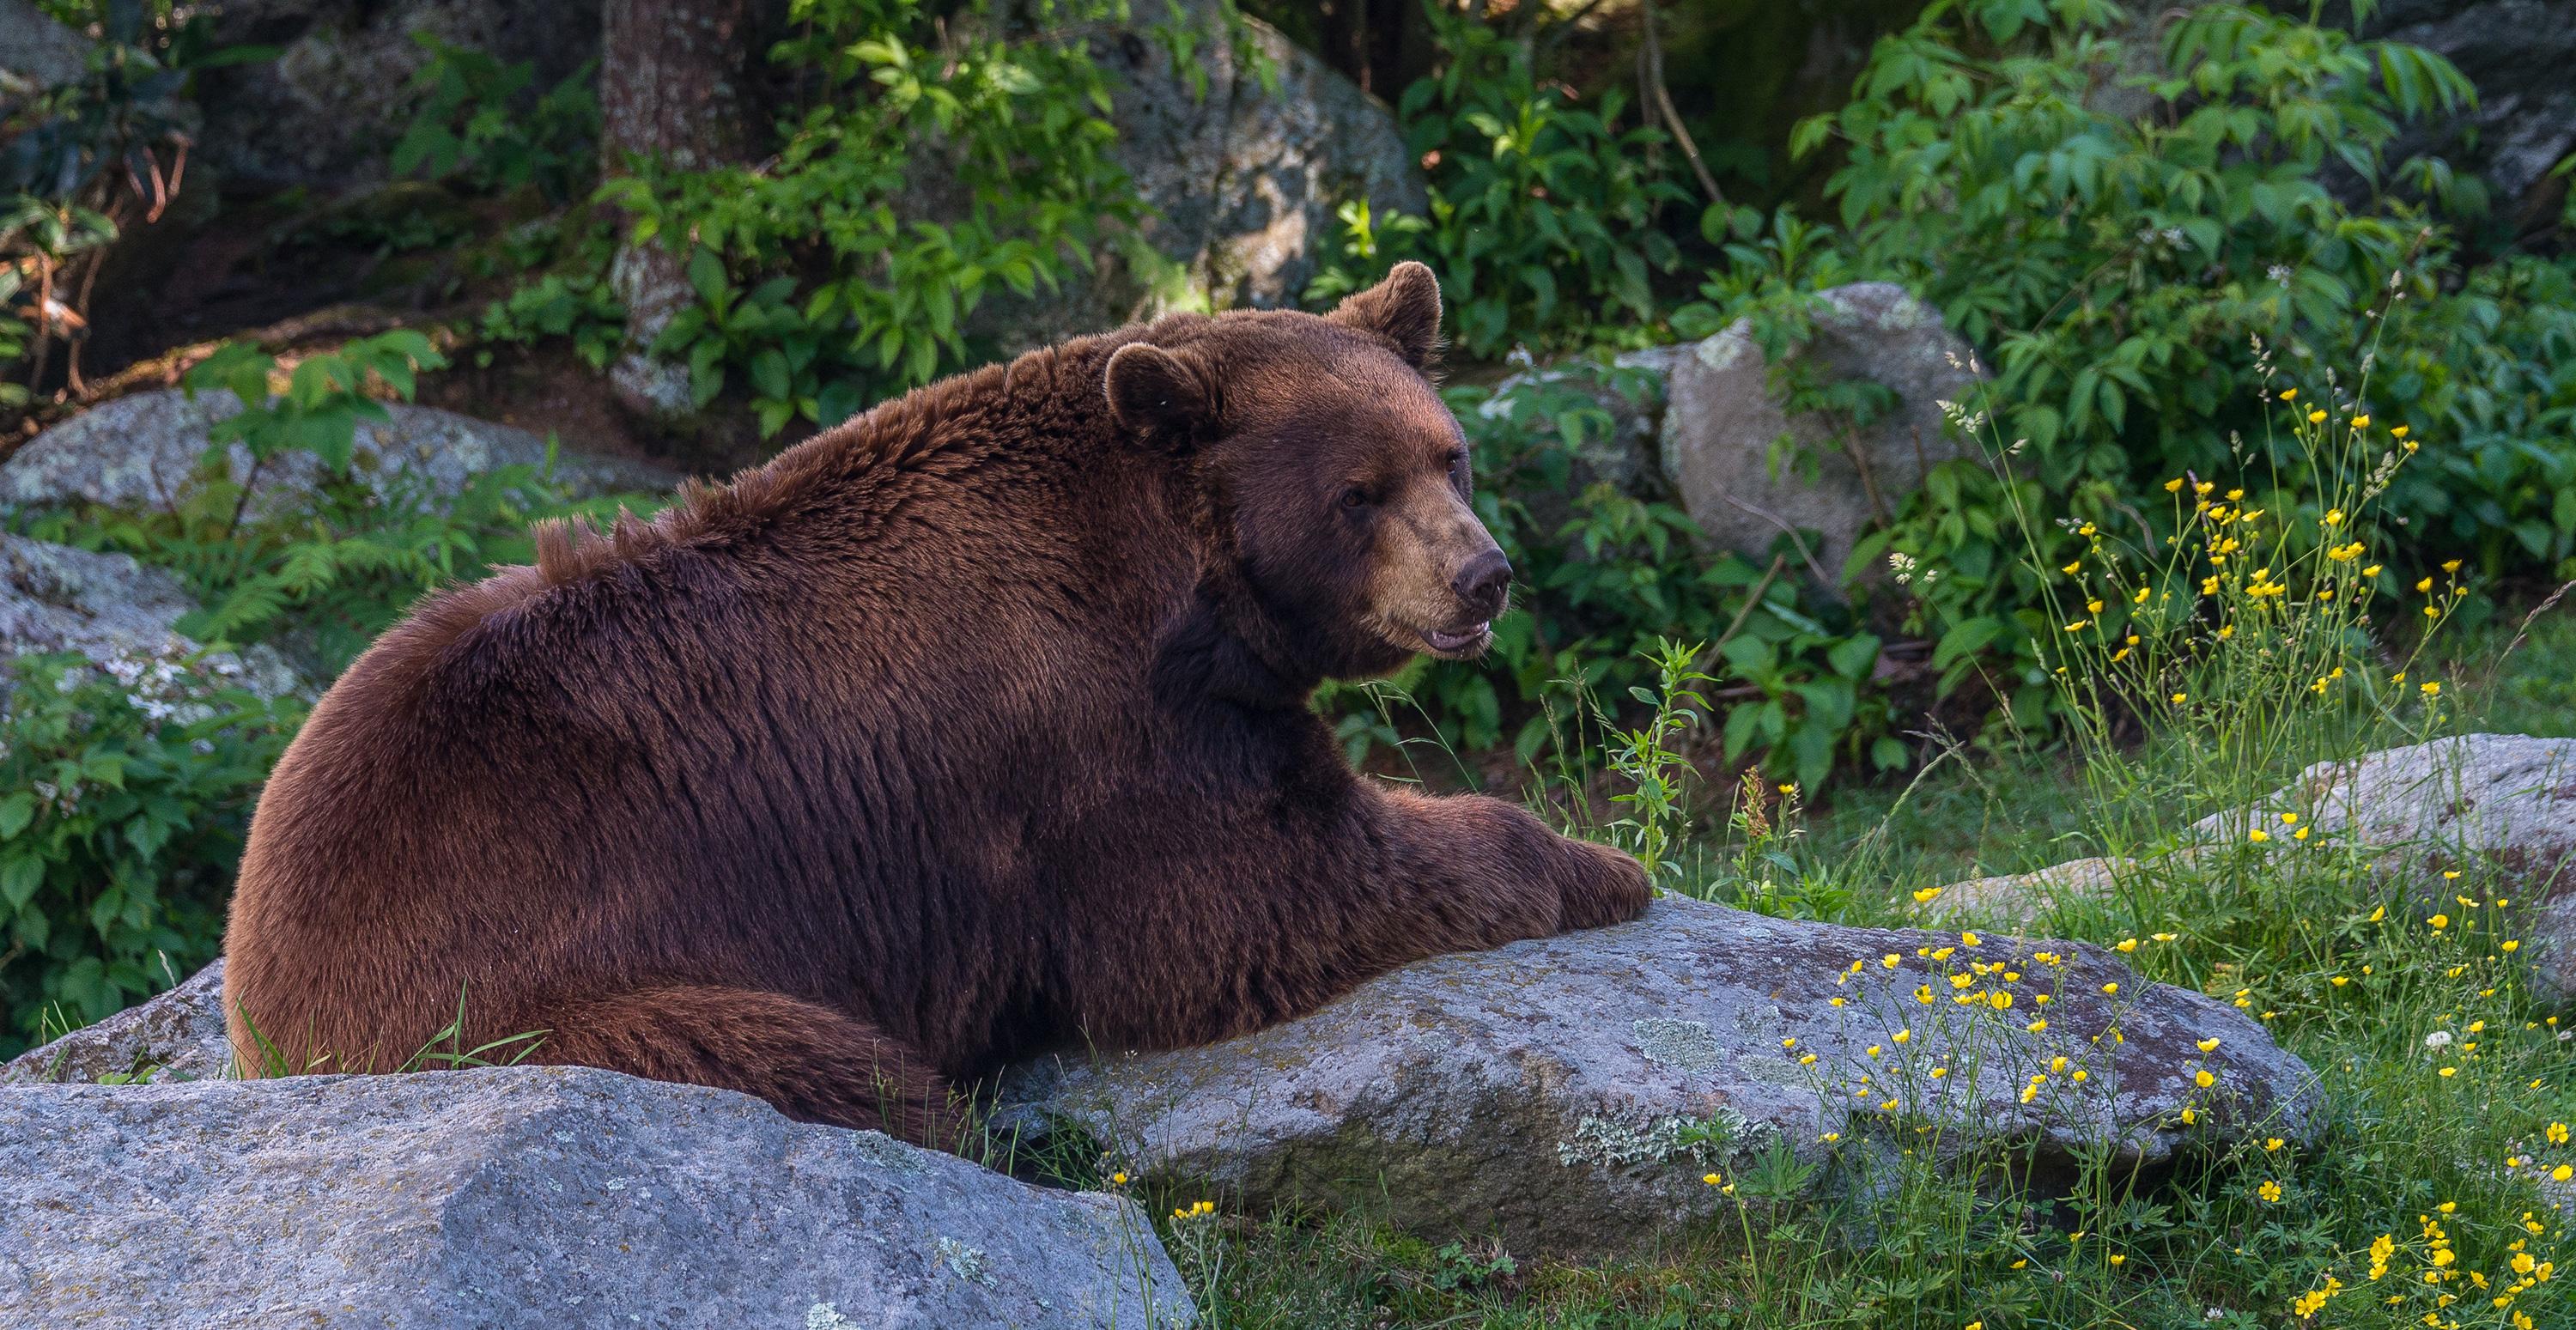 Black Bear sitting on large rocks at the edge of a forest